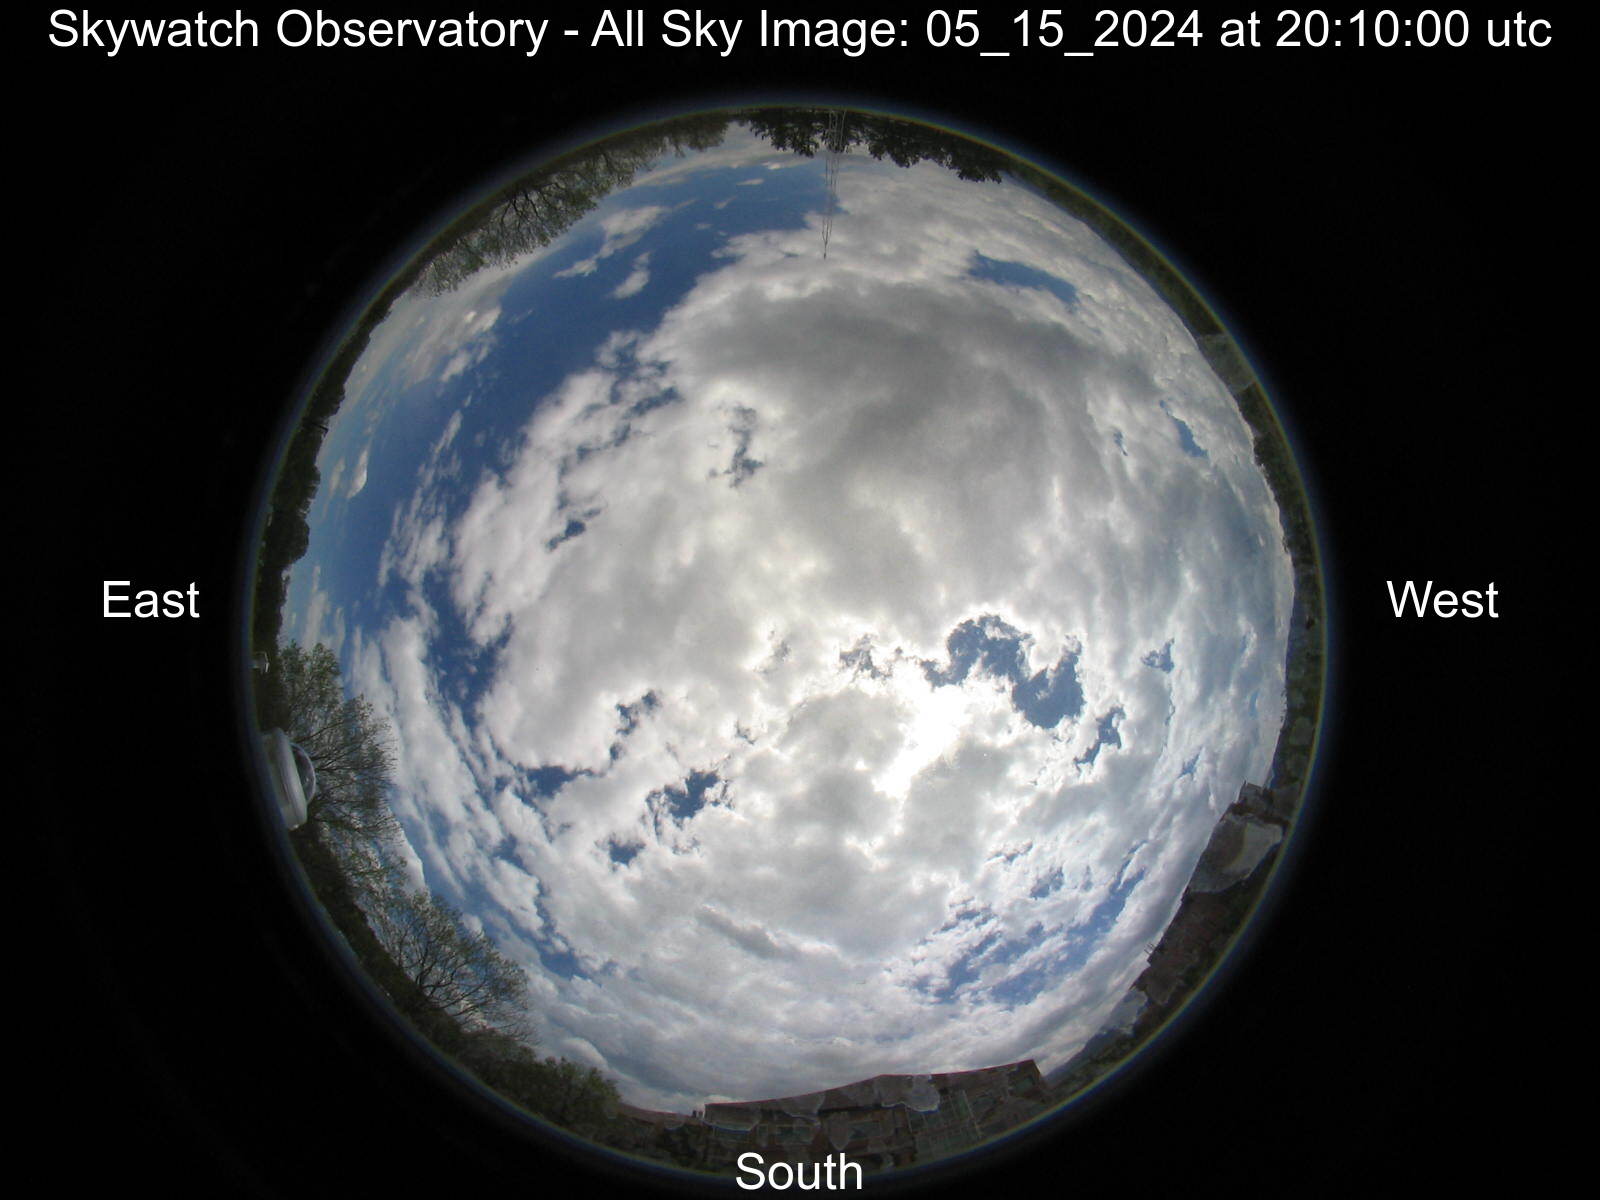 Hemispheric view of the sky above the observatory